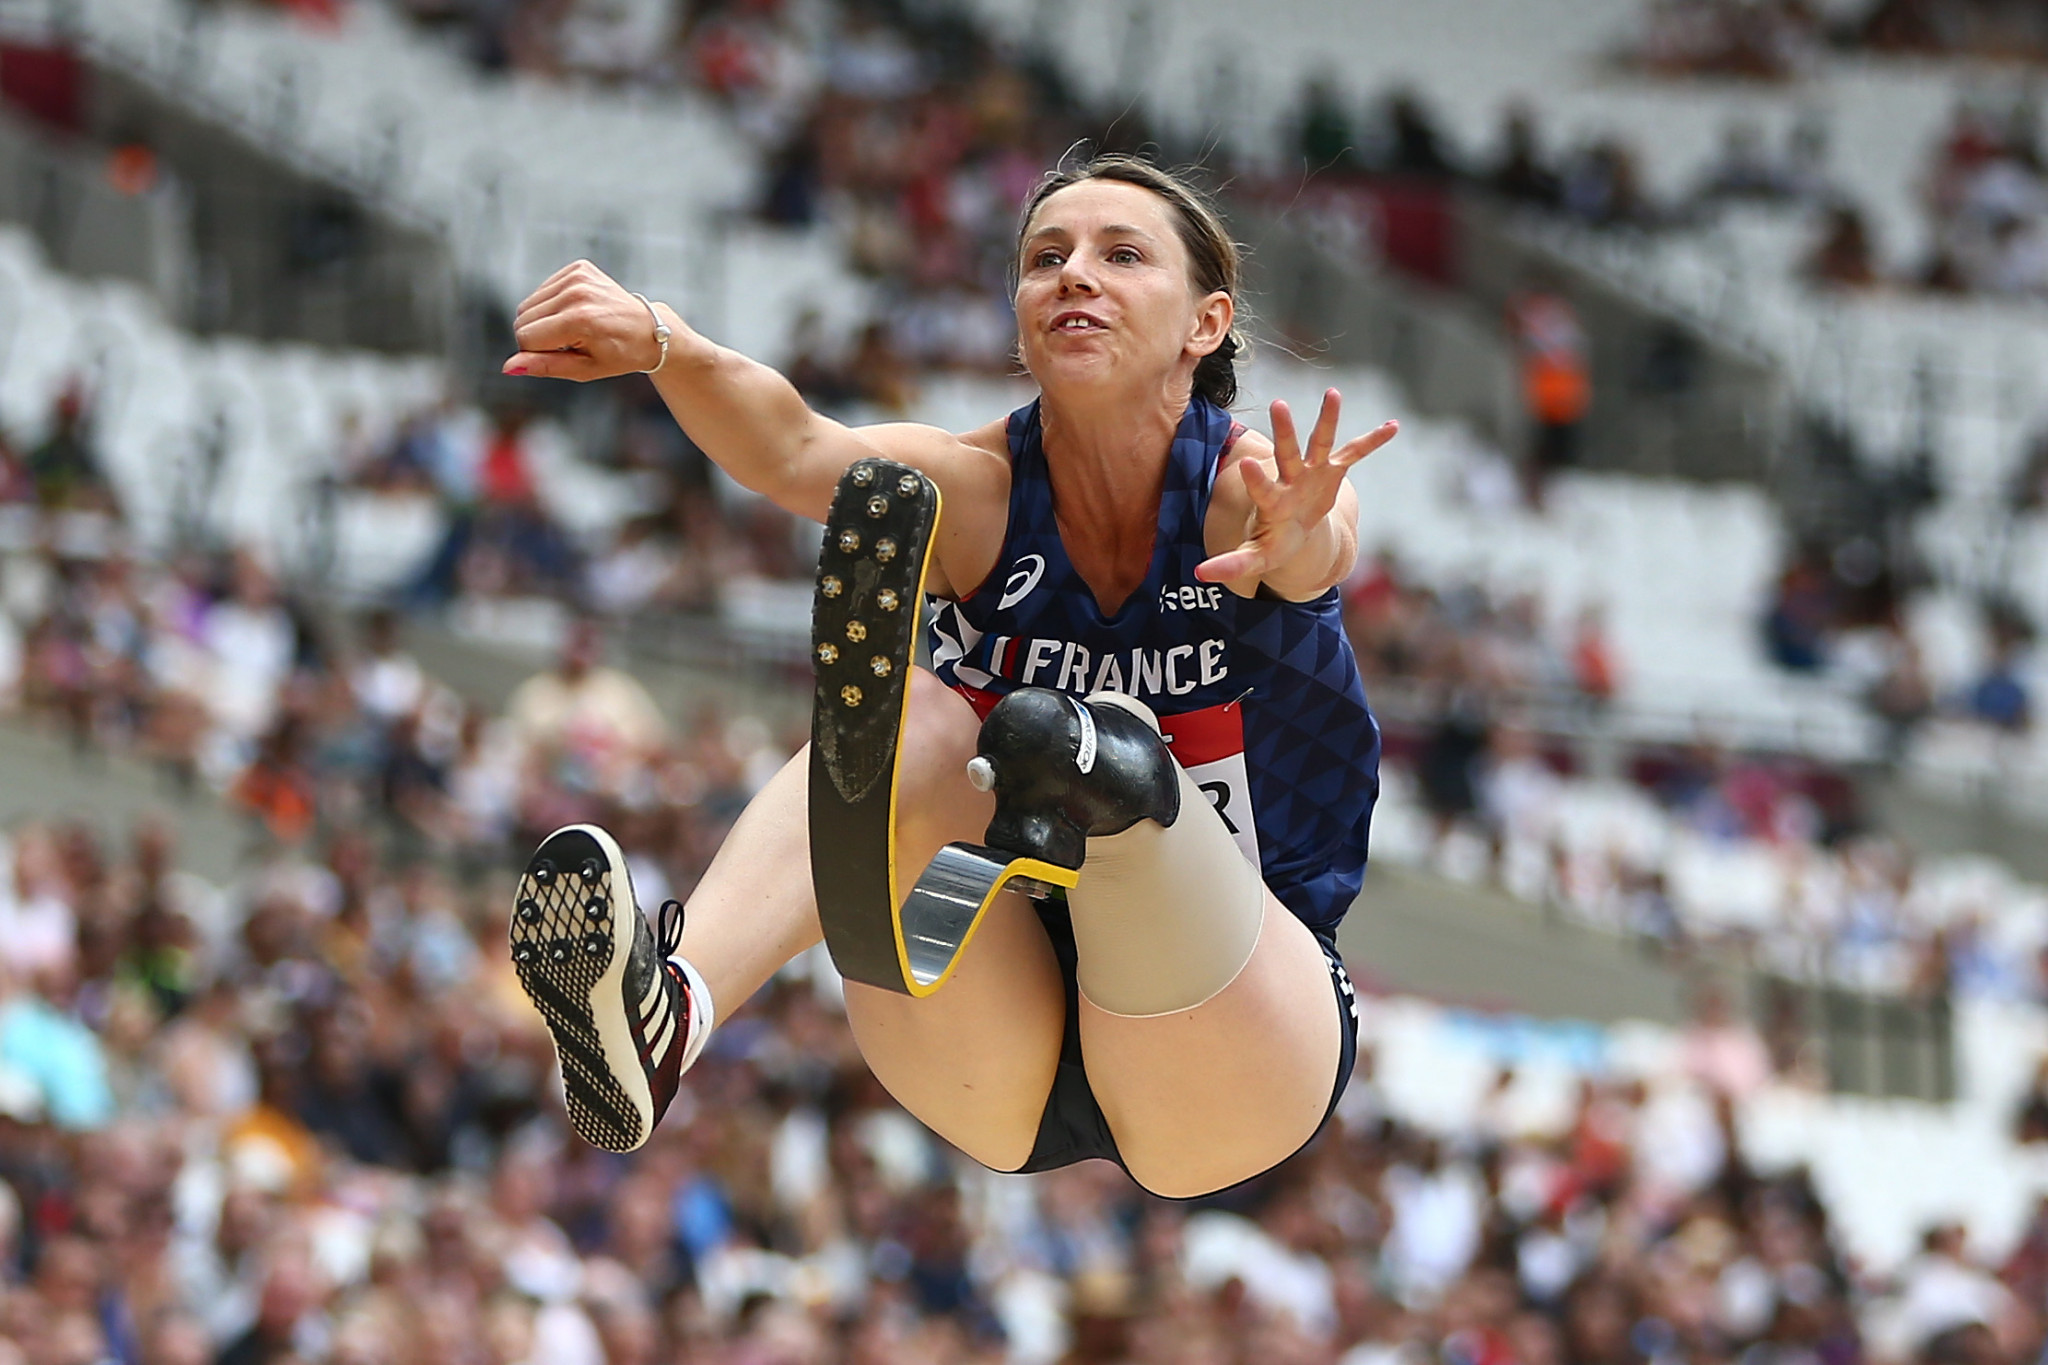 Marie-Amelie Le Fur of France set a world record of 6.01m in the T64 long jump in Berlin ©Getty Images  